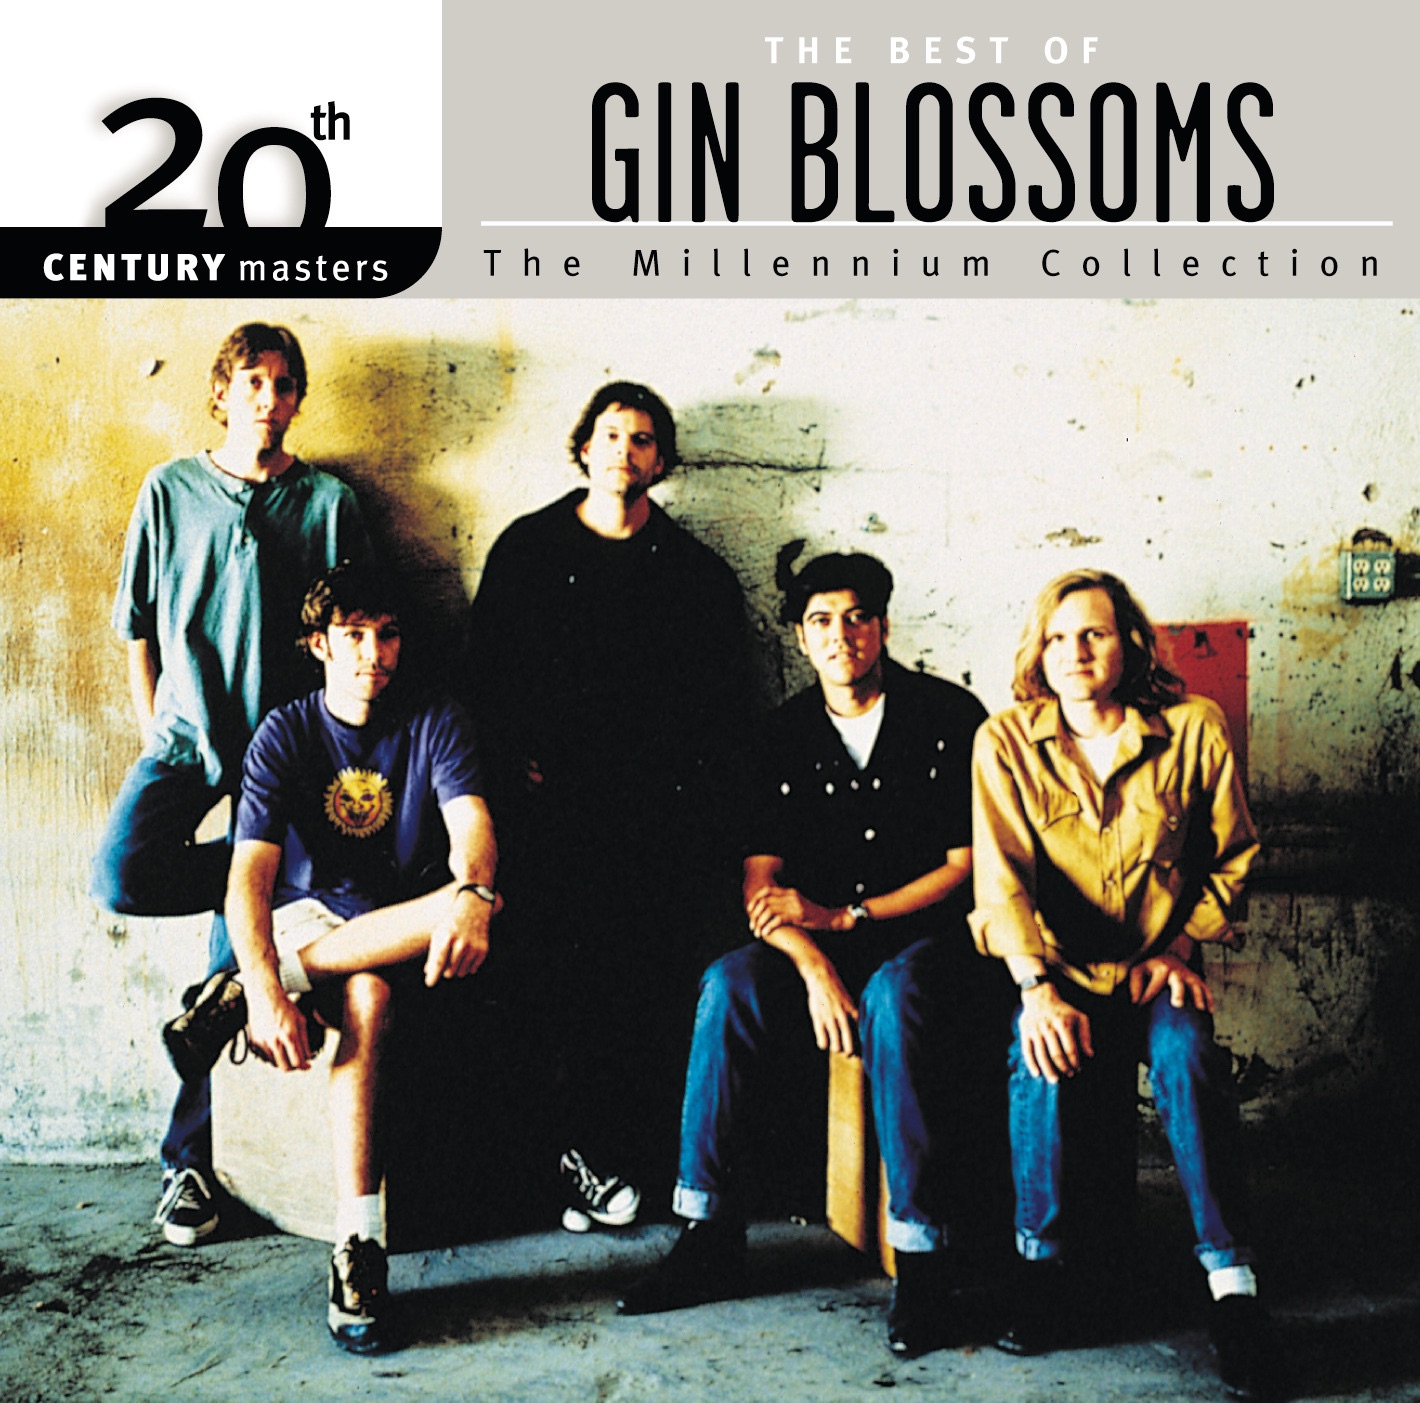 Art for Follow You Down by Gin Blossoms